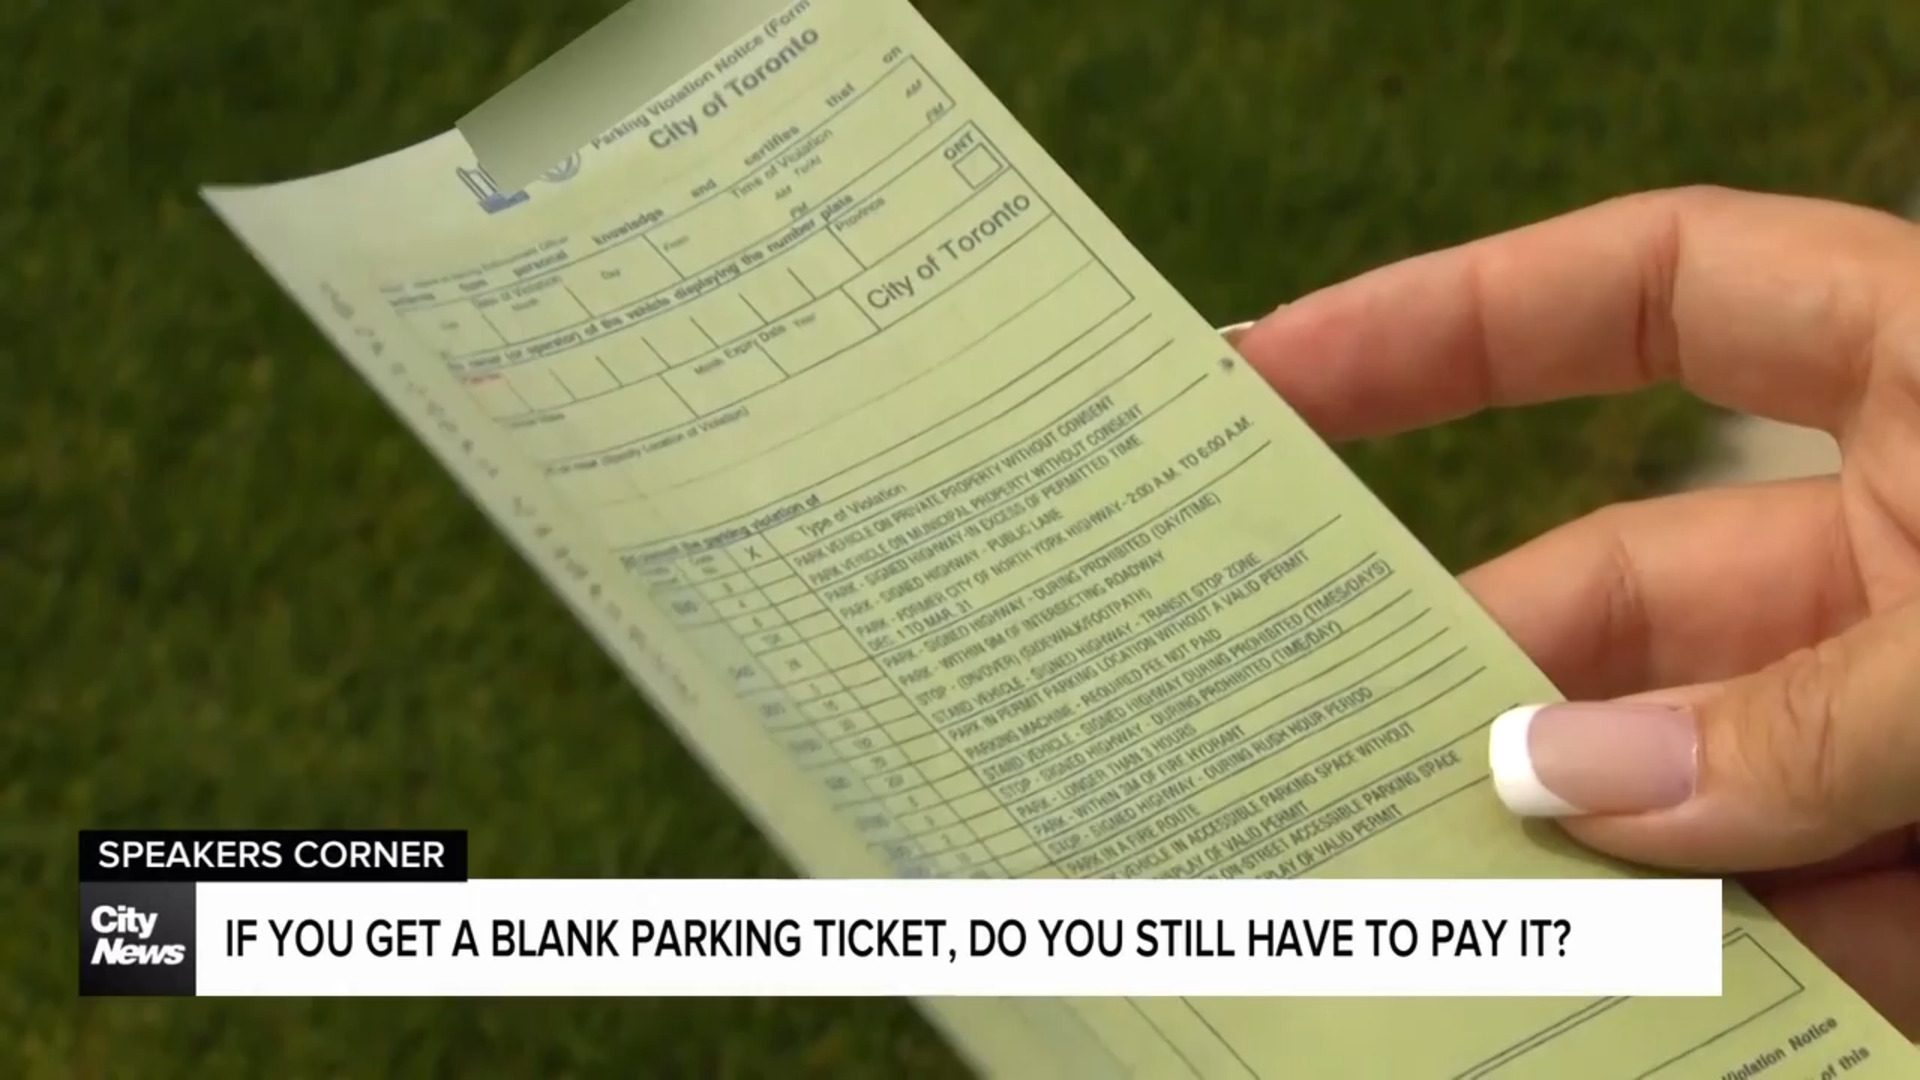 Woman Reaches out to Speakers Corner after getting a mostly blank parking ticket